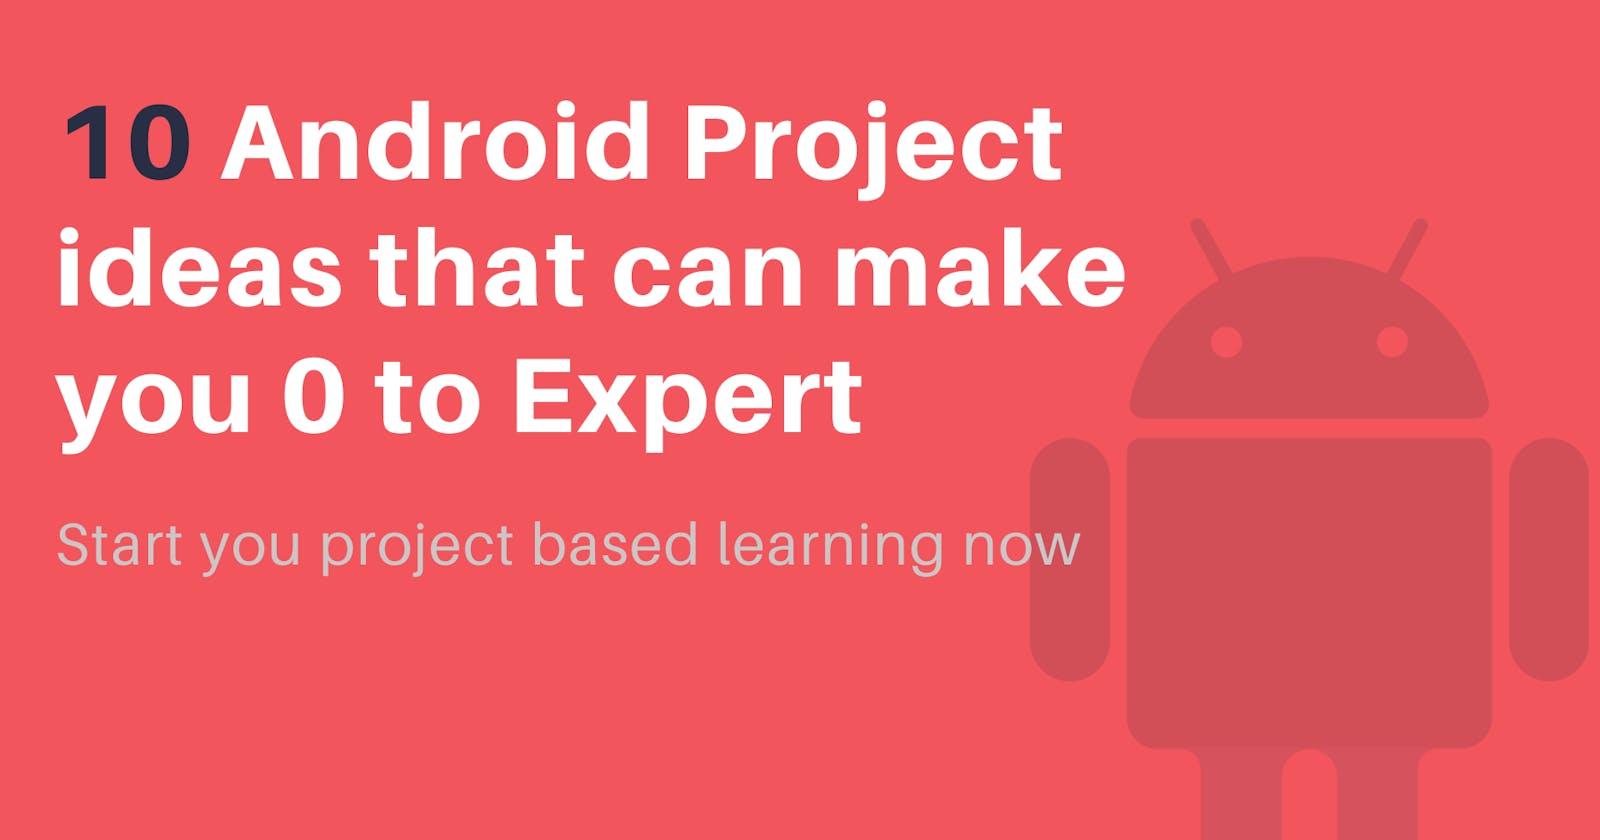 10 Android Project ideas that can make you 0 to Expert